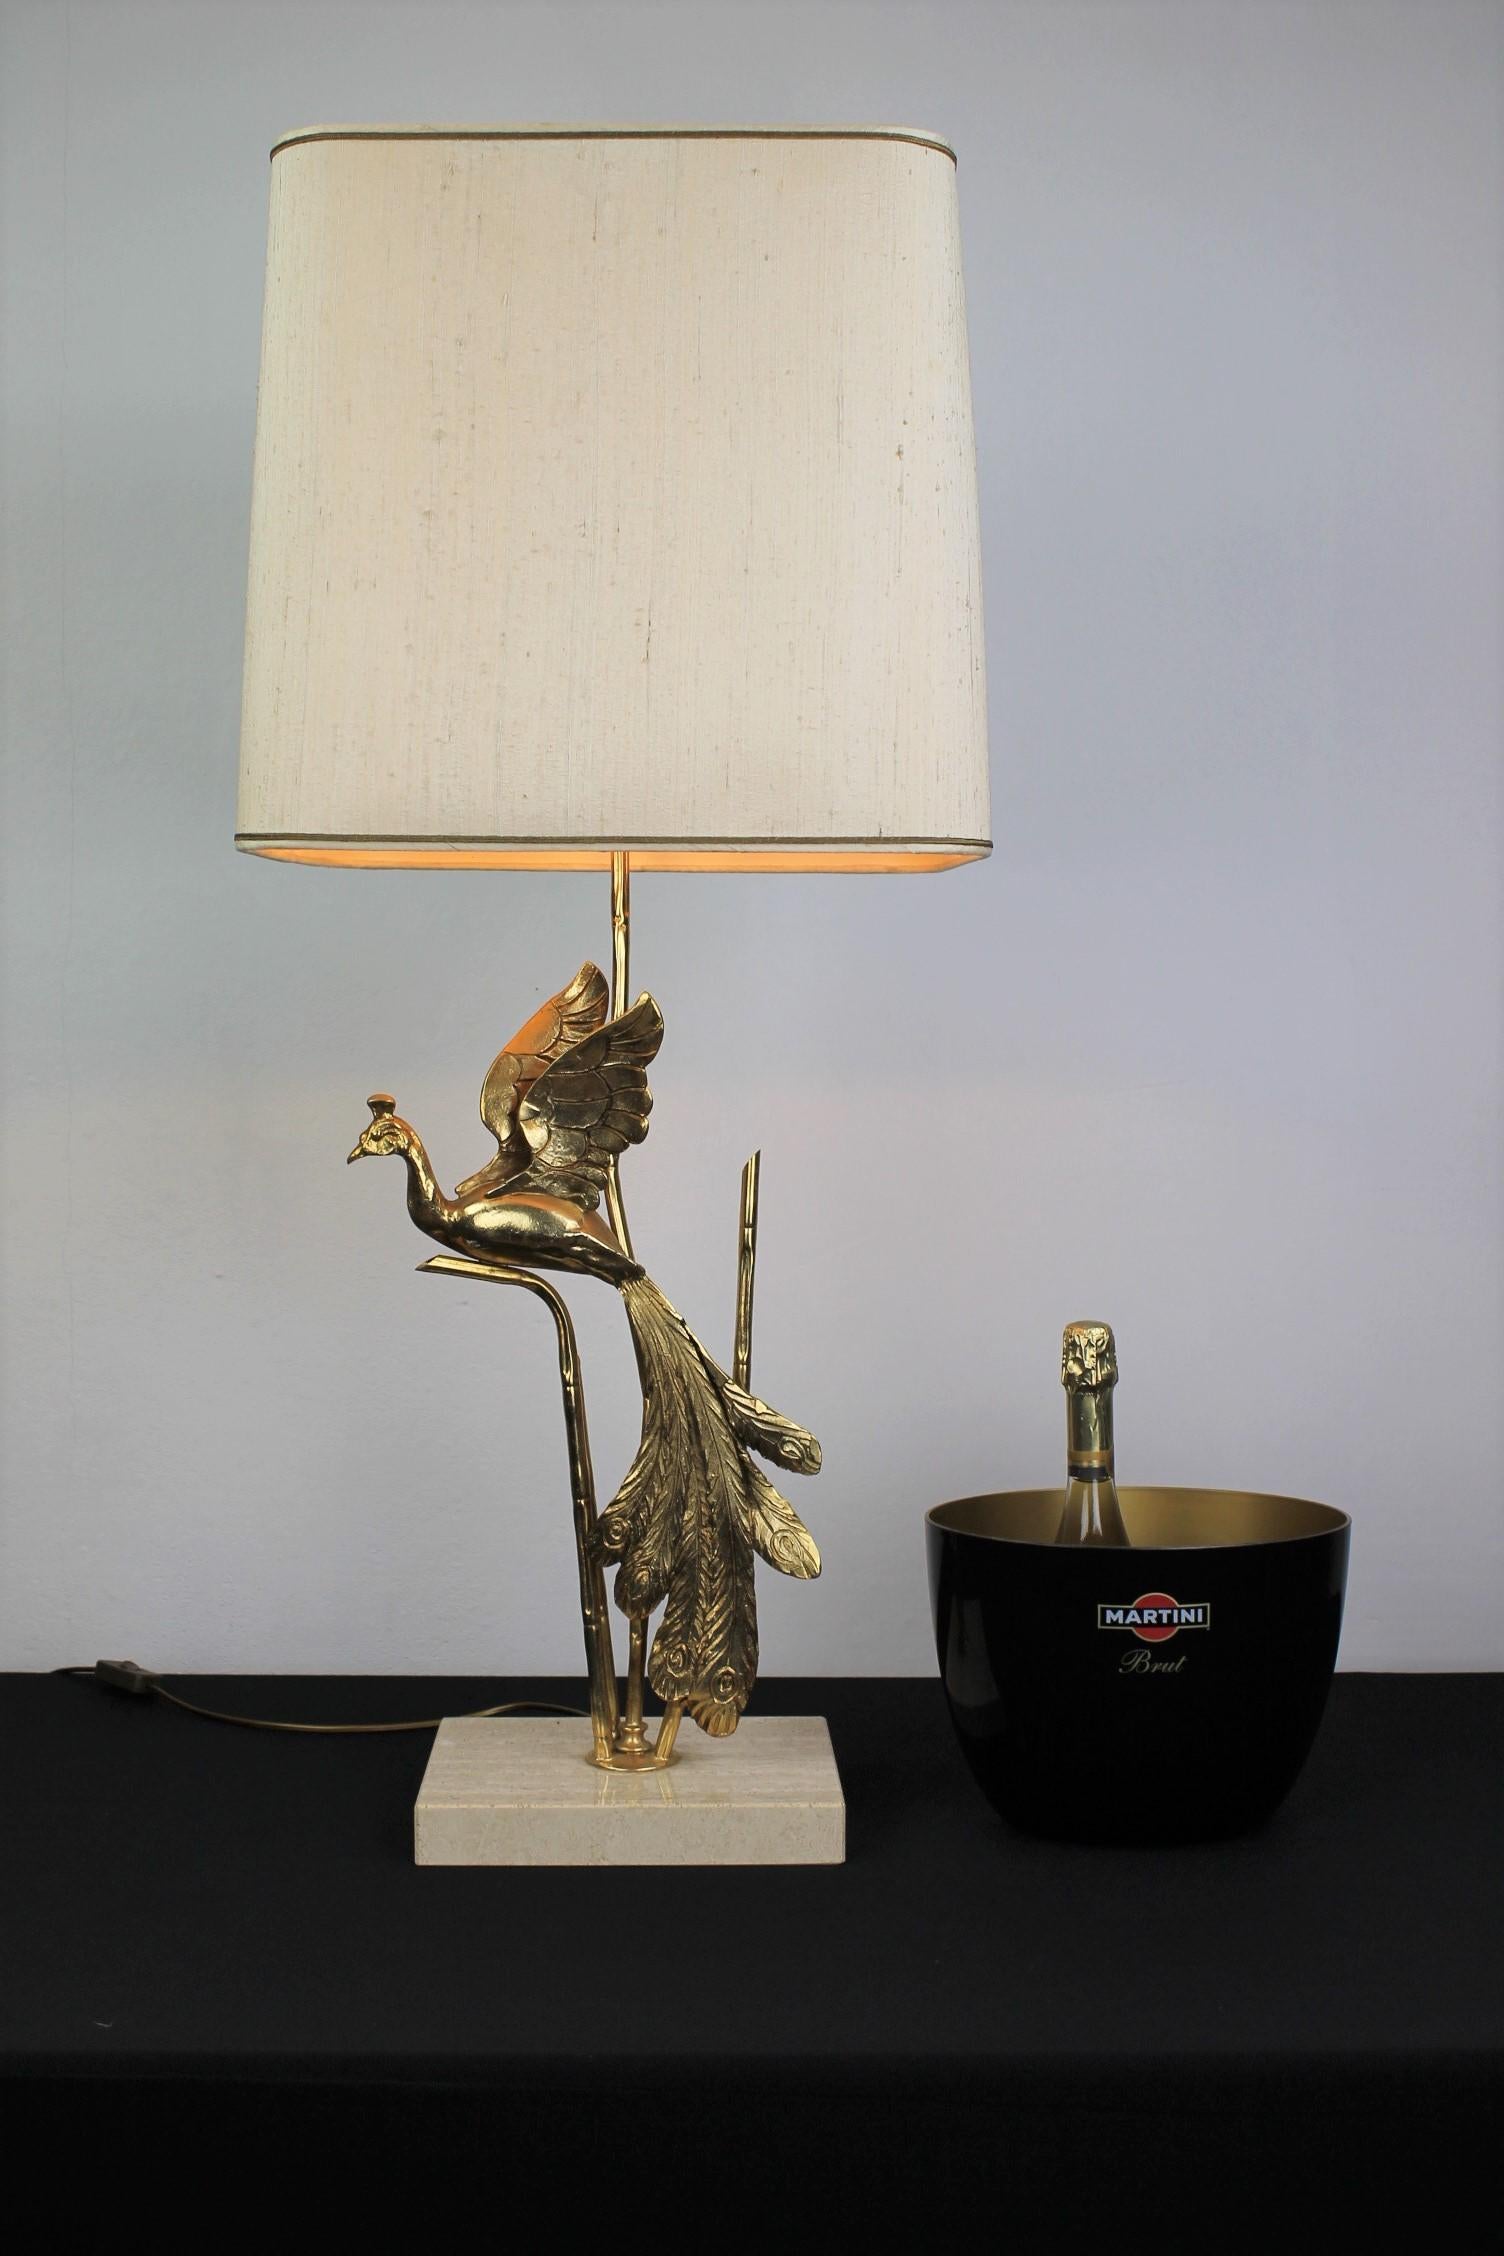 Peacock Table Lamp by Lanciotto for L'Originale, Italy, 1970s For Sale 7